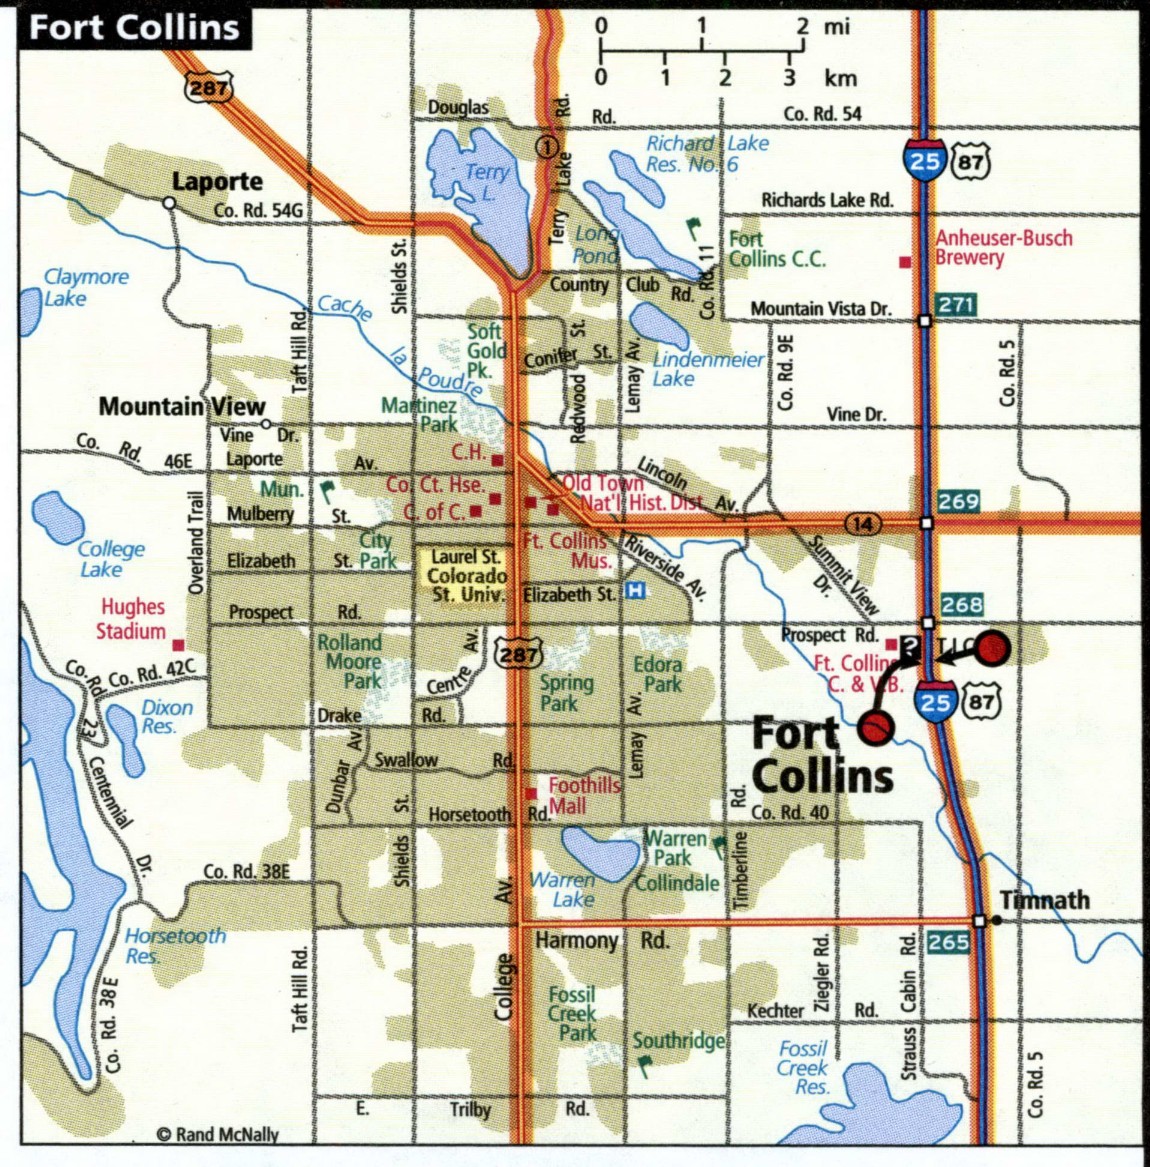 Fort Collins map for truckers